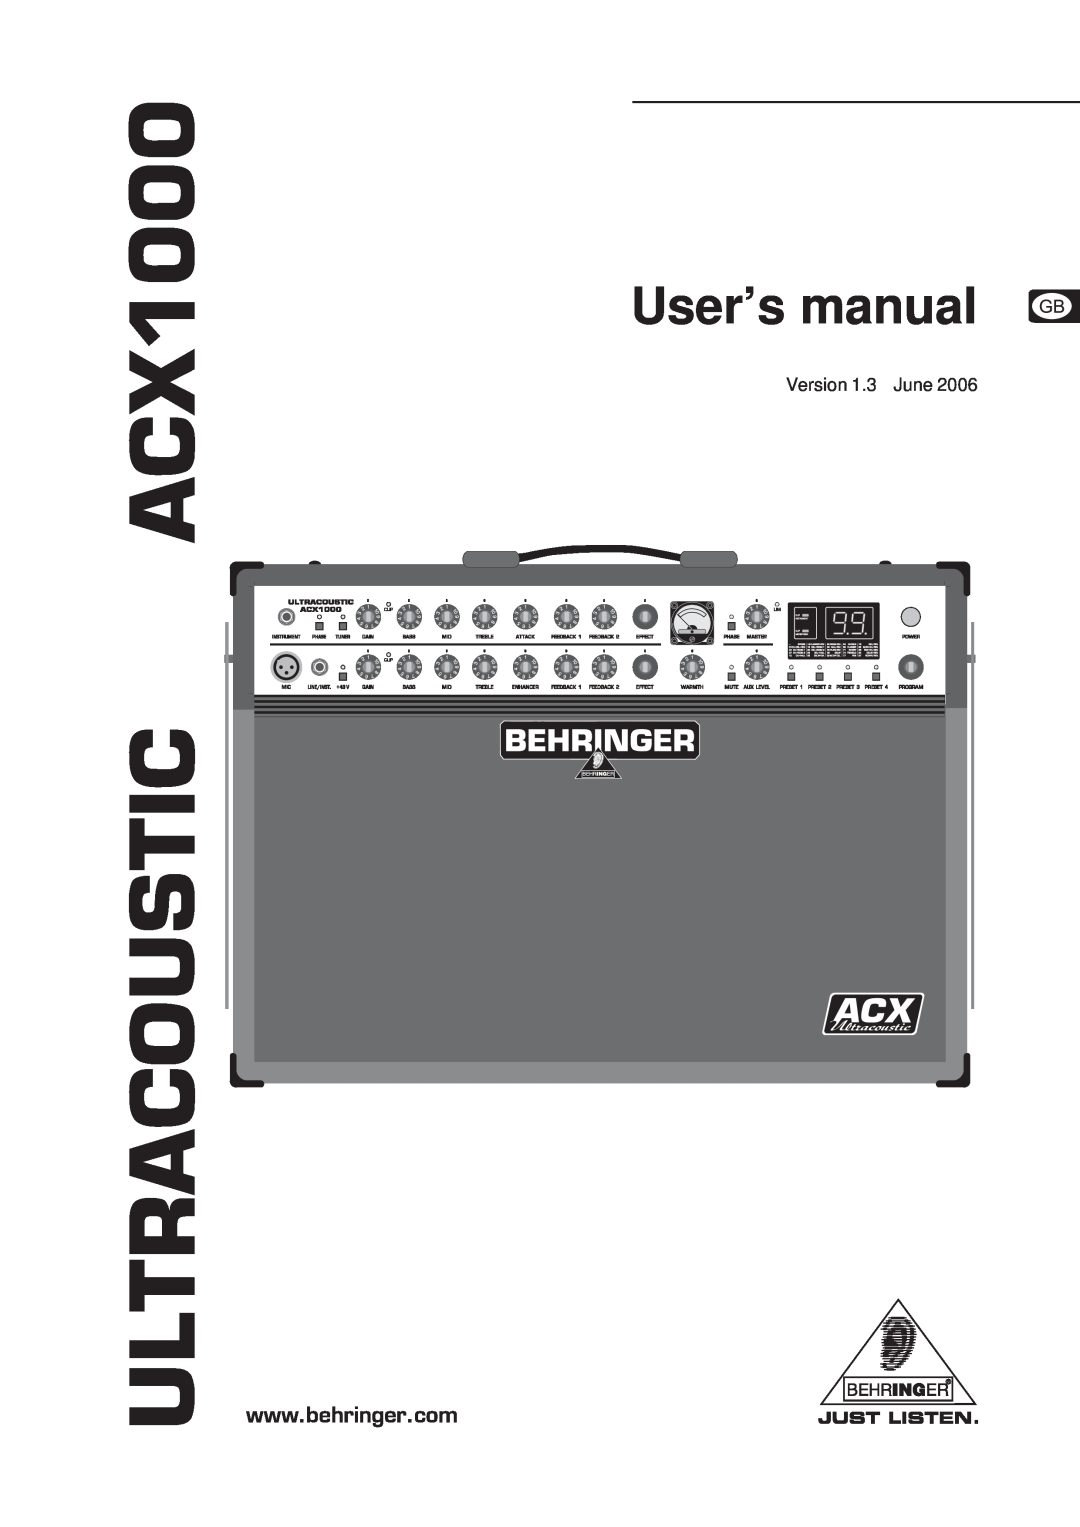 Behringer ACX1000 manual Ultracoustic, User’s manual 